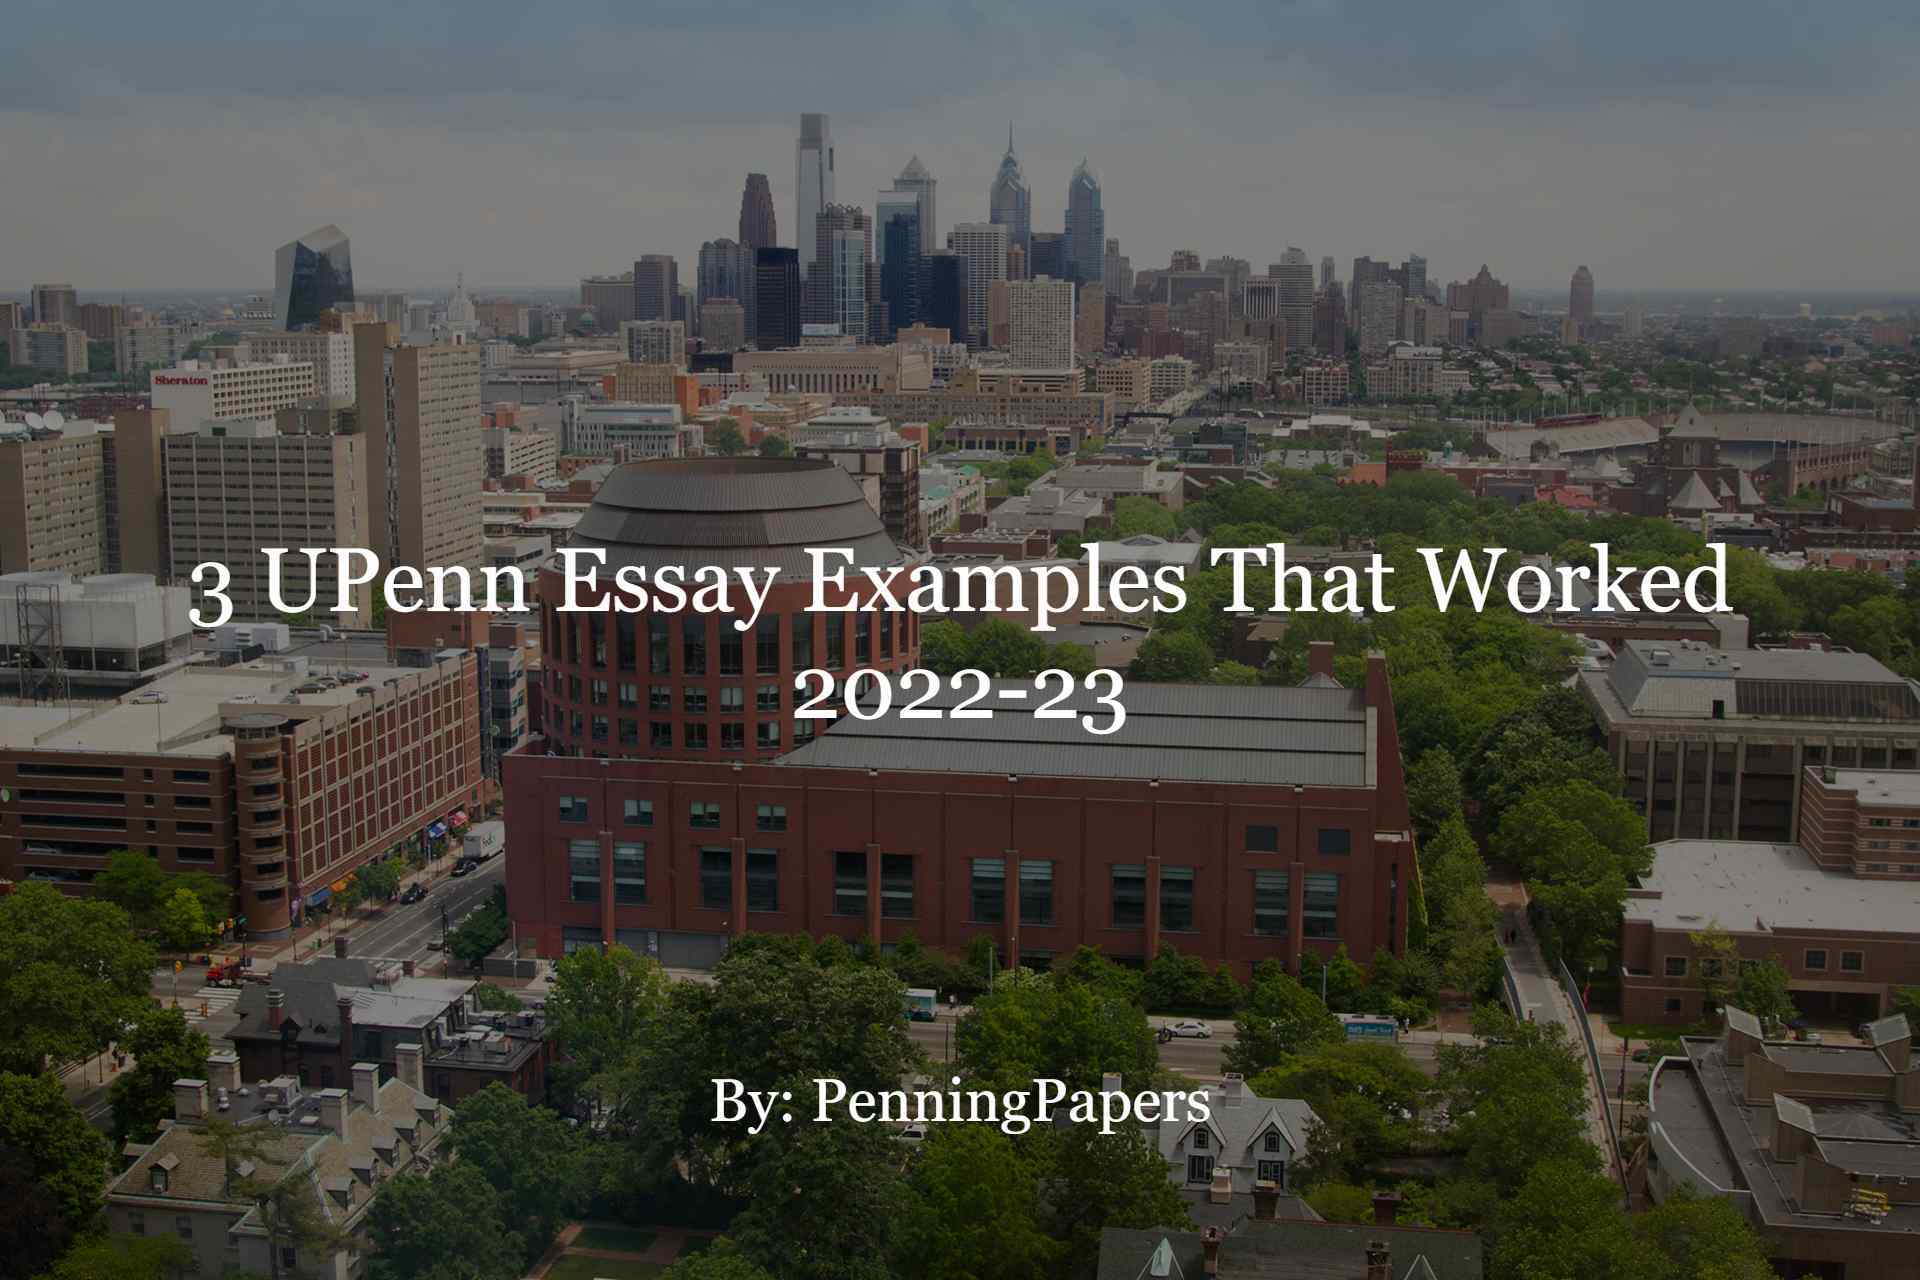 upenn admissions essay questions